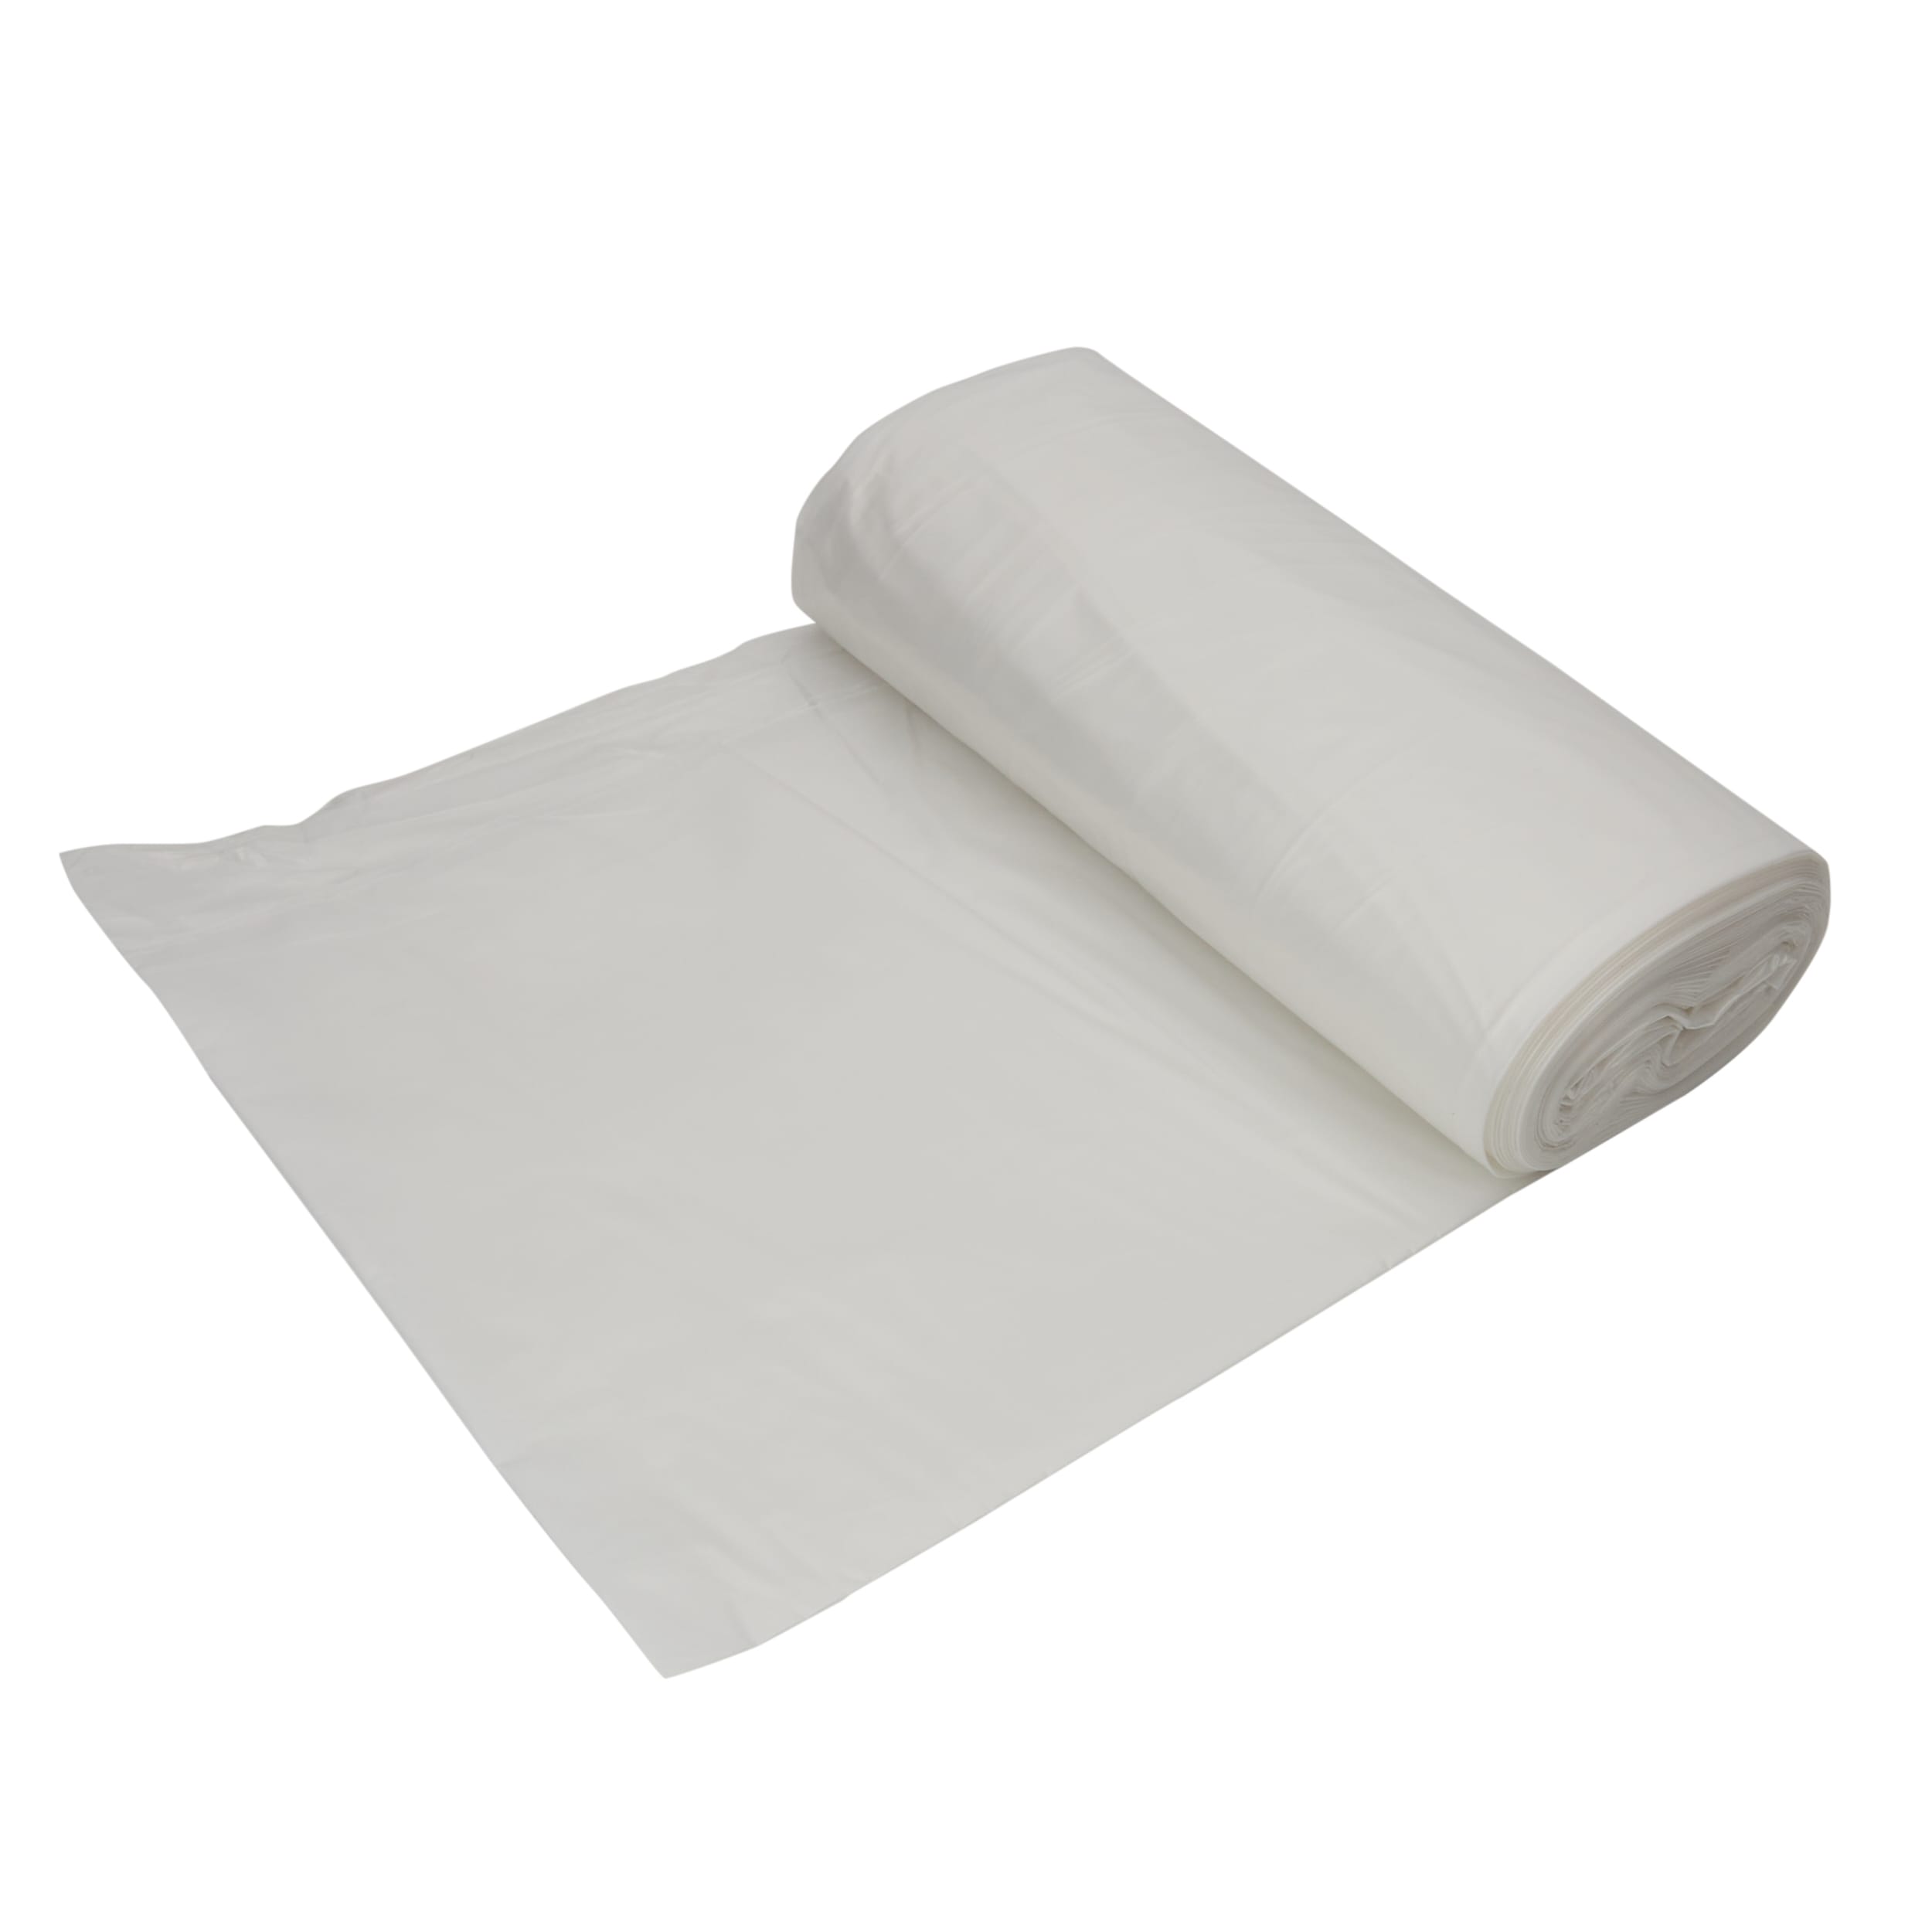 Cheap Plastic Drop Cloth for Painting Protective Film Table Cover